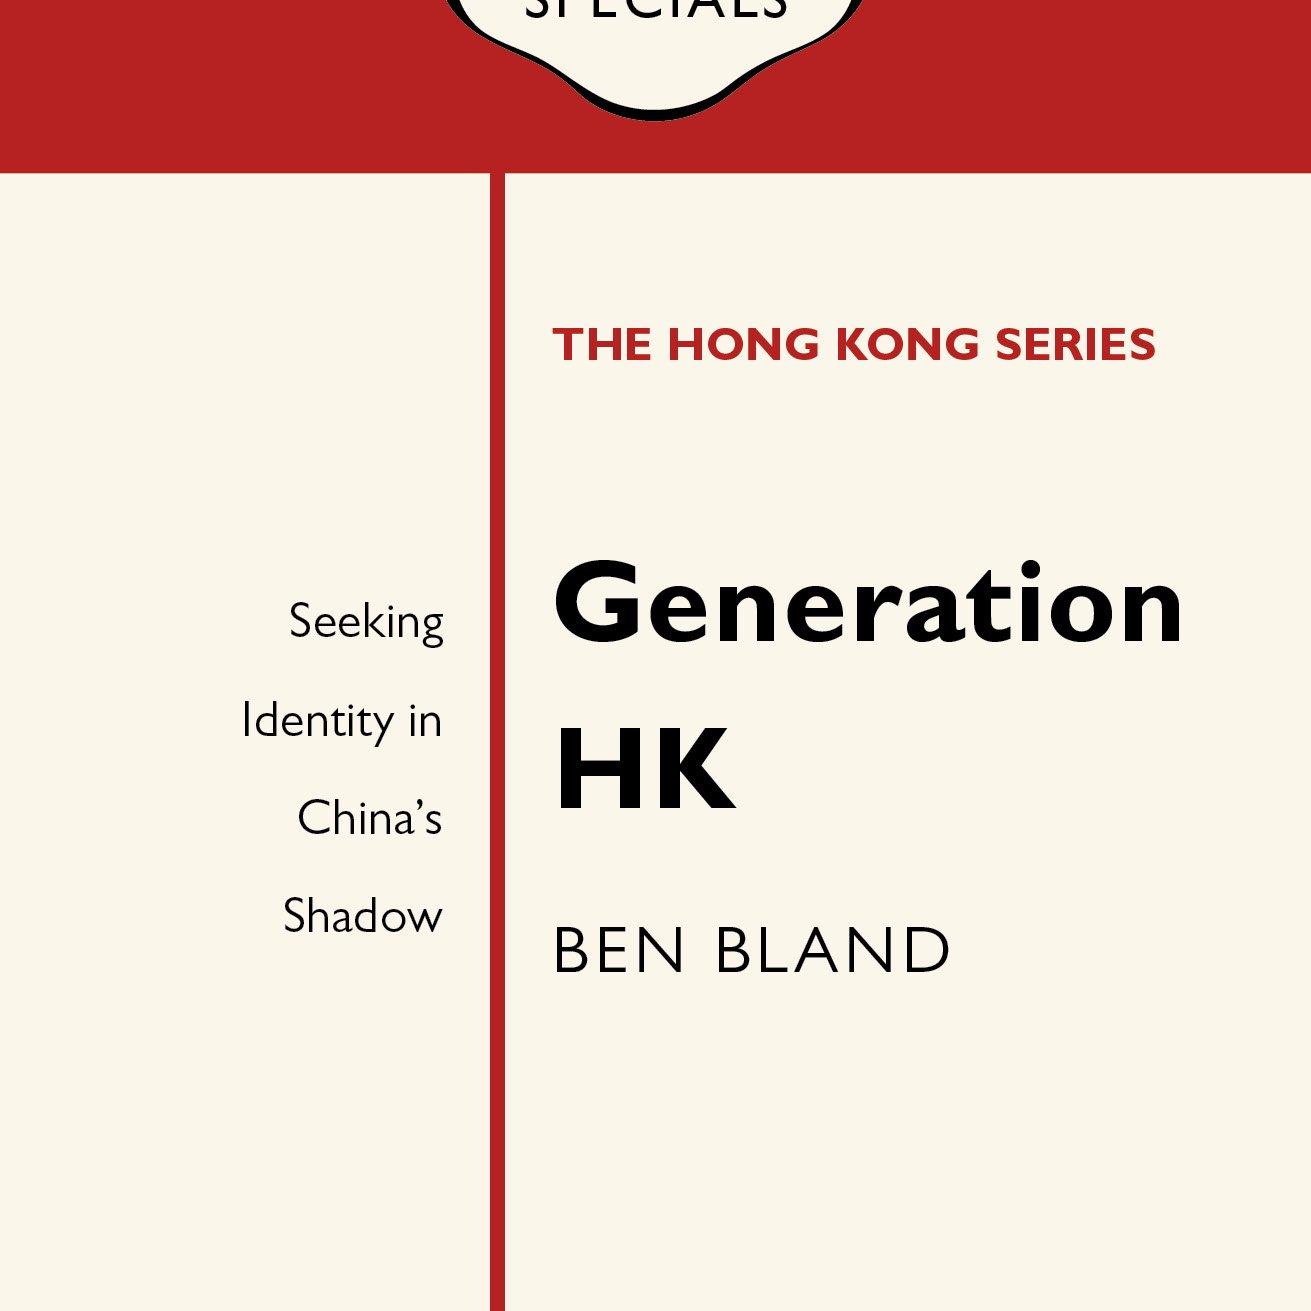 Generation HK: Seeking Identity in China's Shadow by @benjaminbland. A @PenguinChina book exploring young Hong Kongers' struggle to re-define their future.